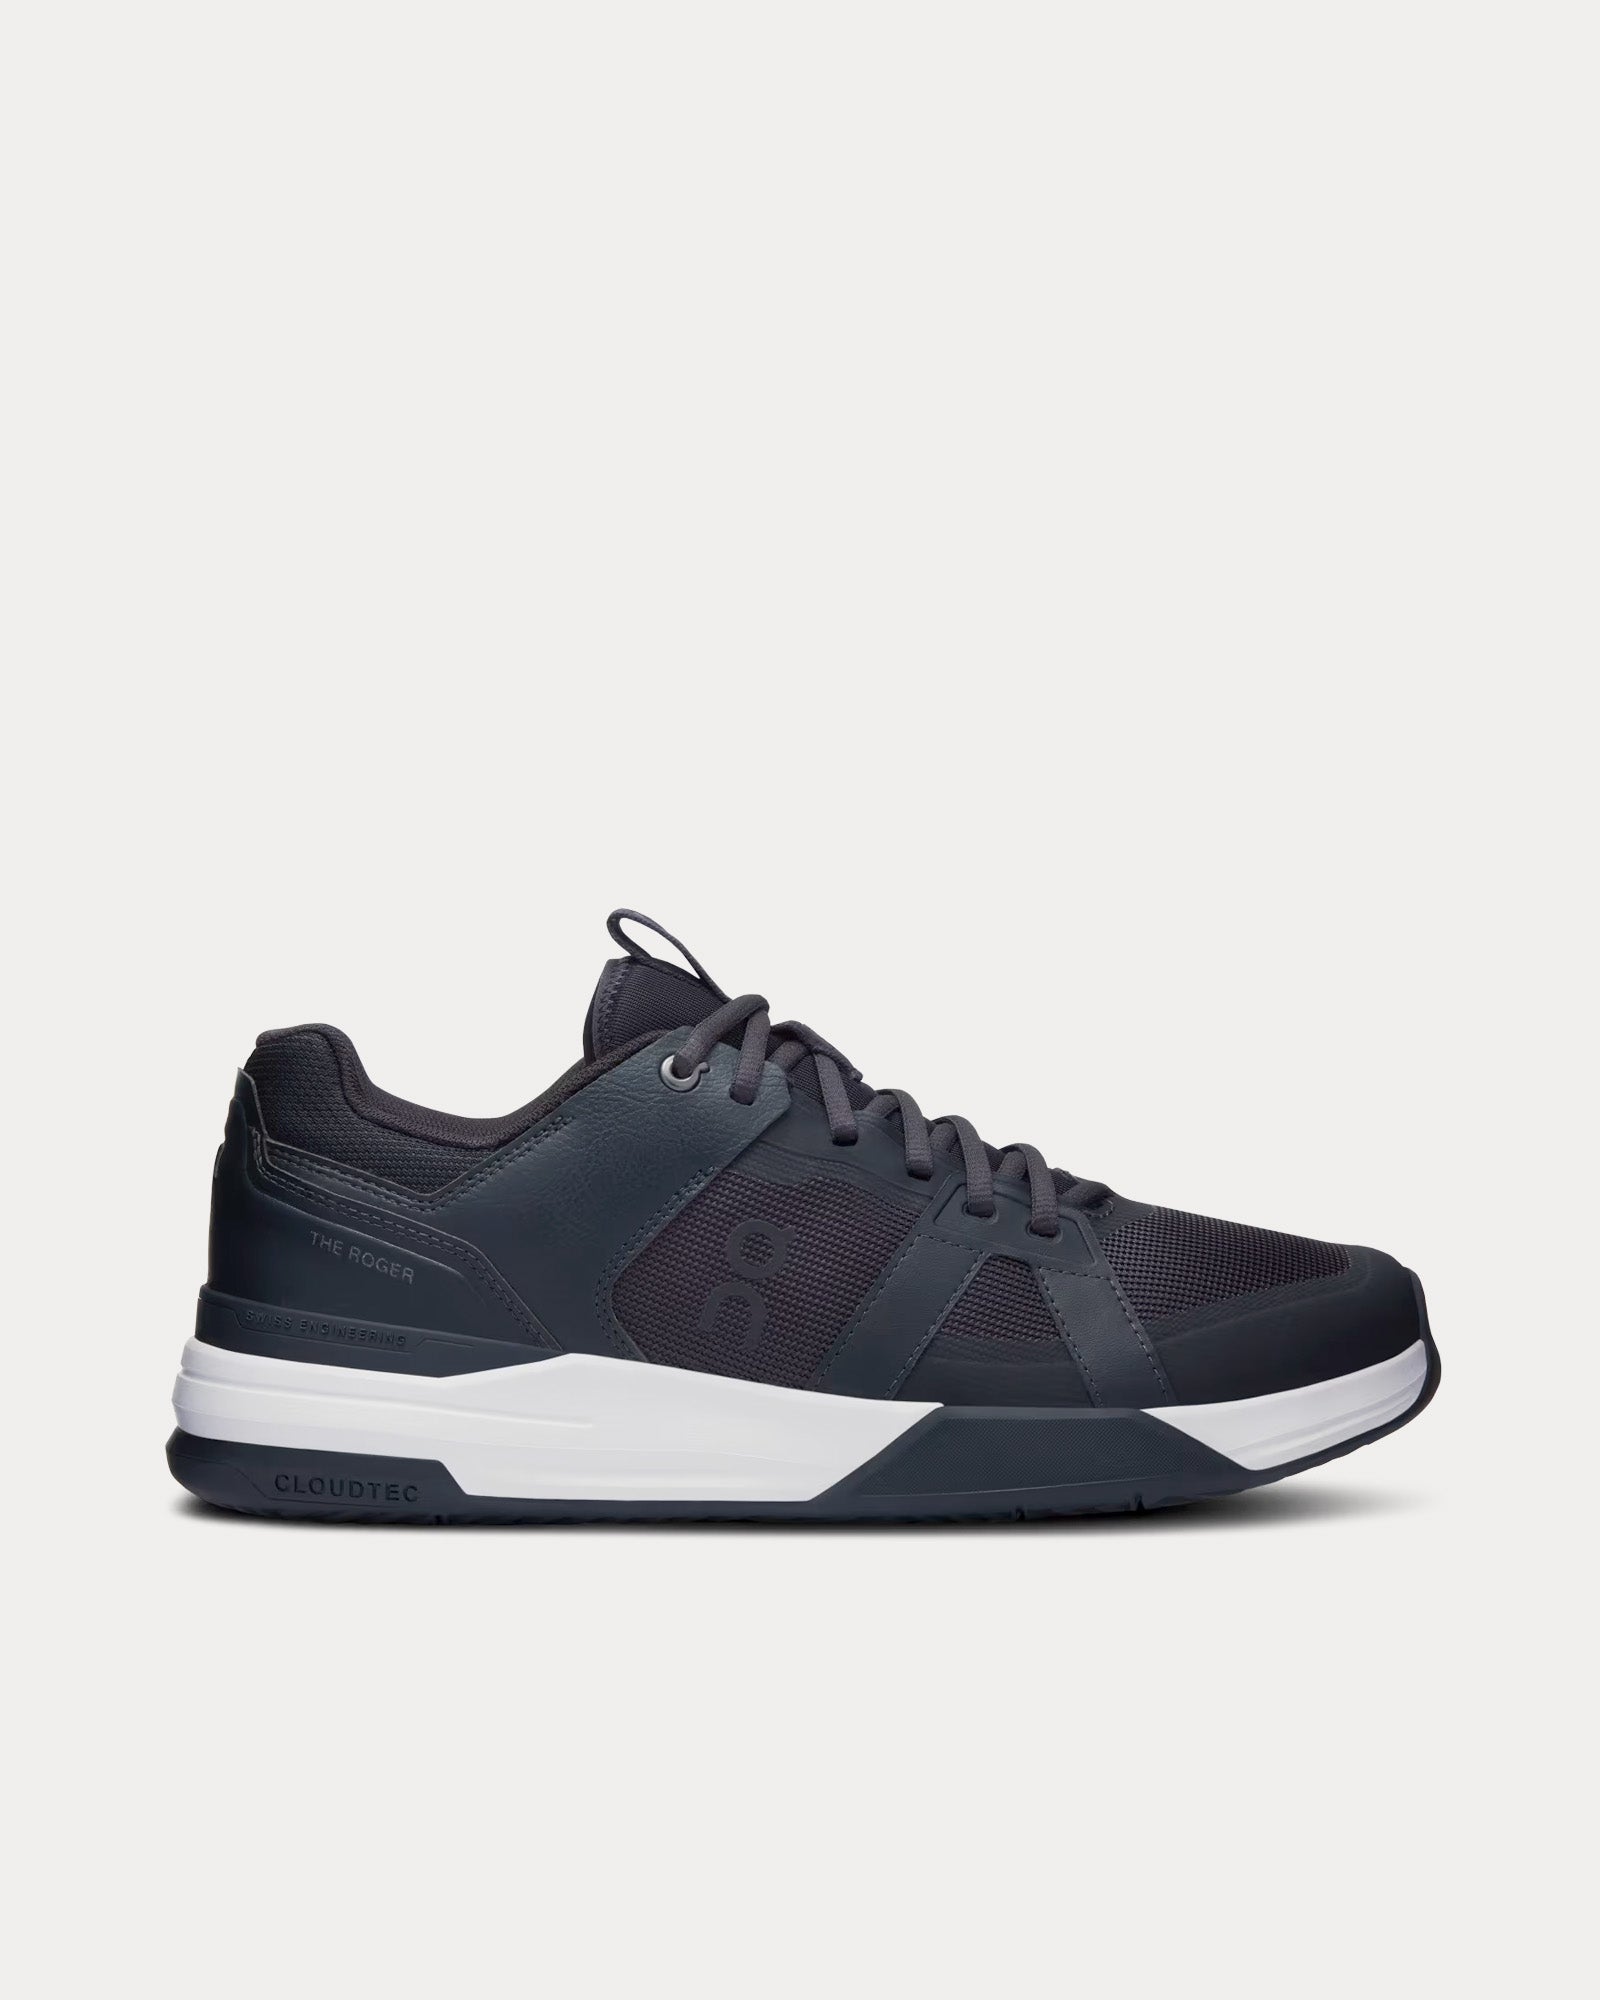 On Running - The Roger Clubhouse Pro Black / White Low Top Sneakers